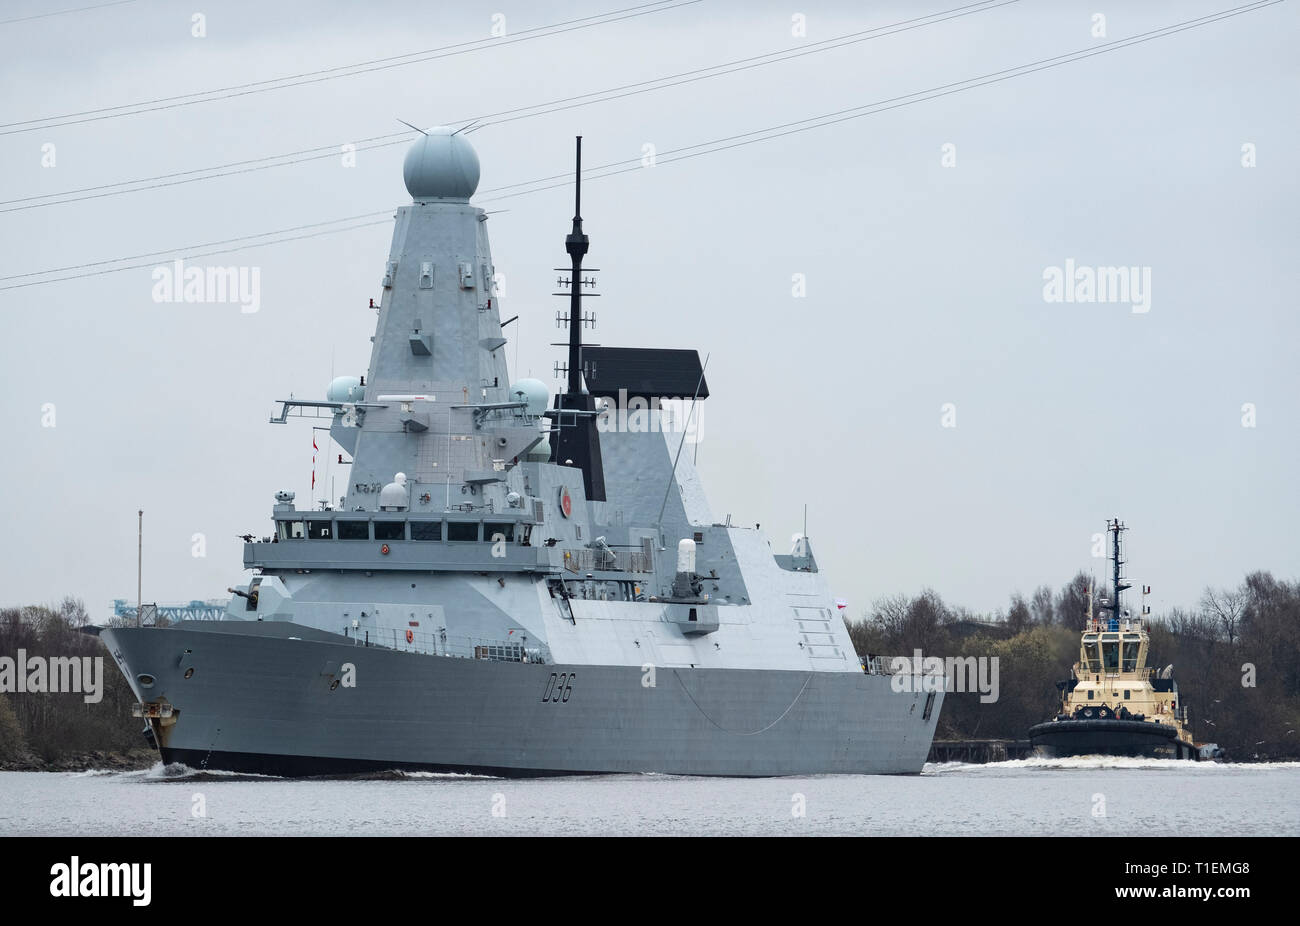 Erskine, Scotland, UK. 26th Mar, 2019. HMS Defender, a Type 45 Destroyer, leaves Glasgow and sails to sea on the River Clyde under the Erskine Bridge after her first home visit in 5 years. Built at Govan on the Clyde, HMS Defender will now join Exercise Joint Warrior, a multi national military exercise off the west coast of Scotland. Credit: Iain Masterton/Alamy Live News Stock Photo